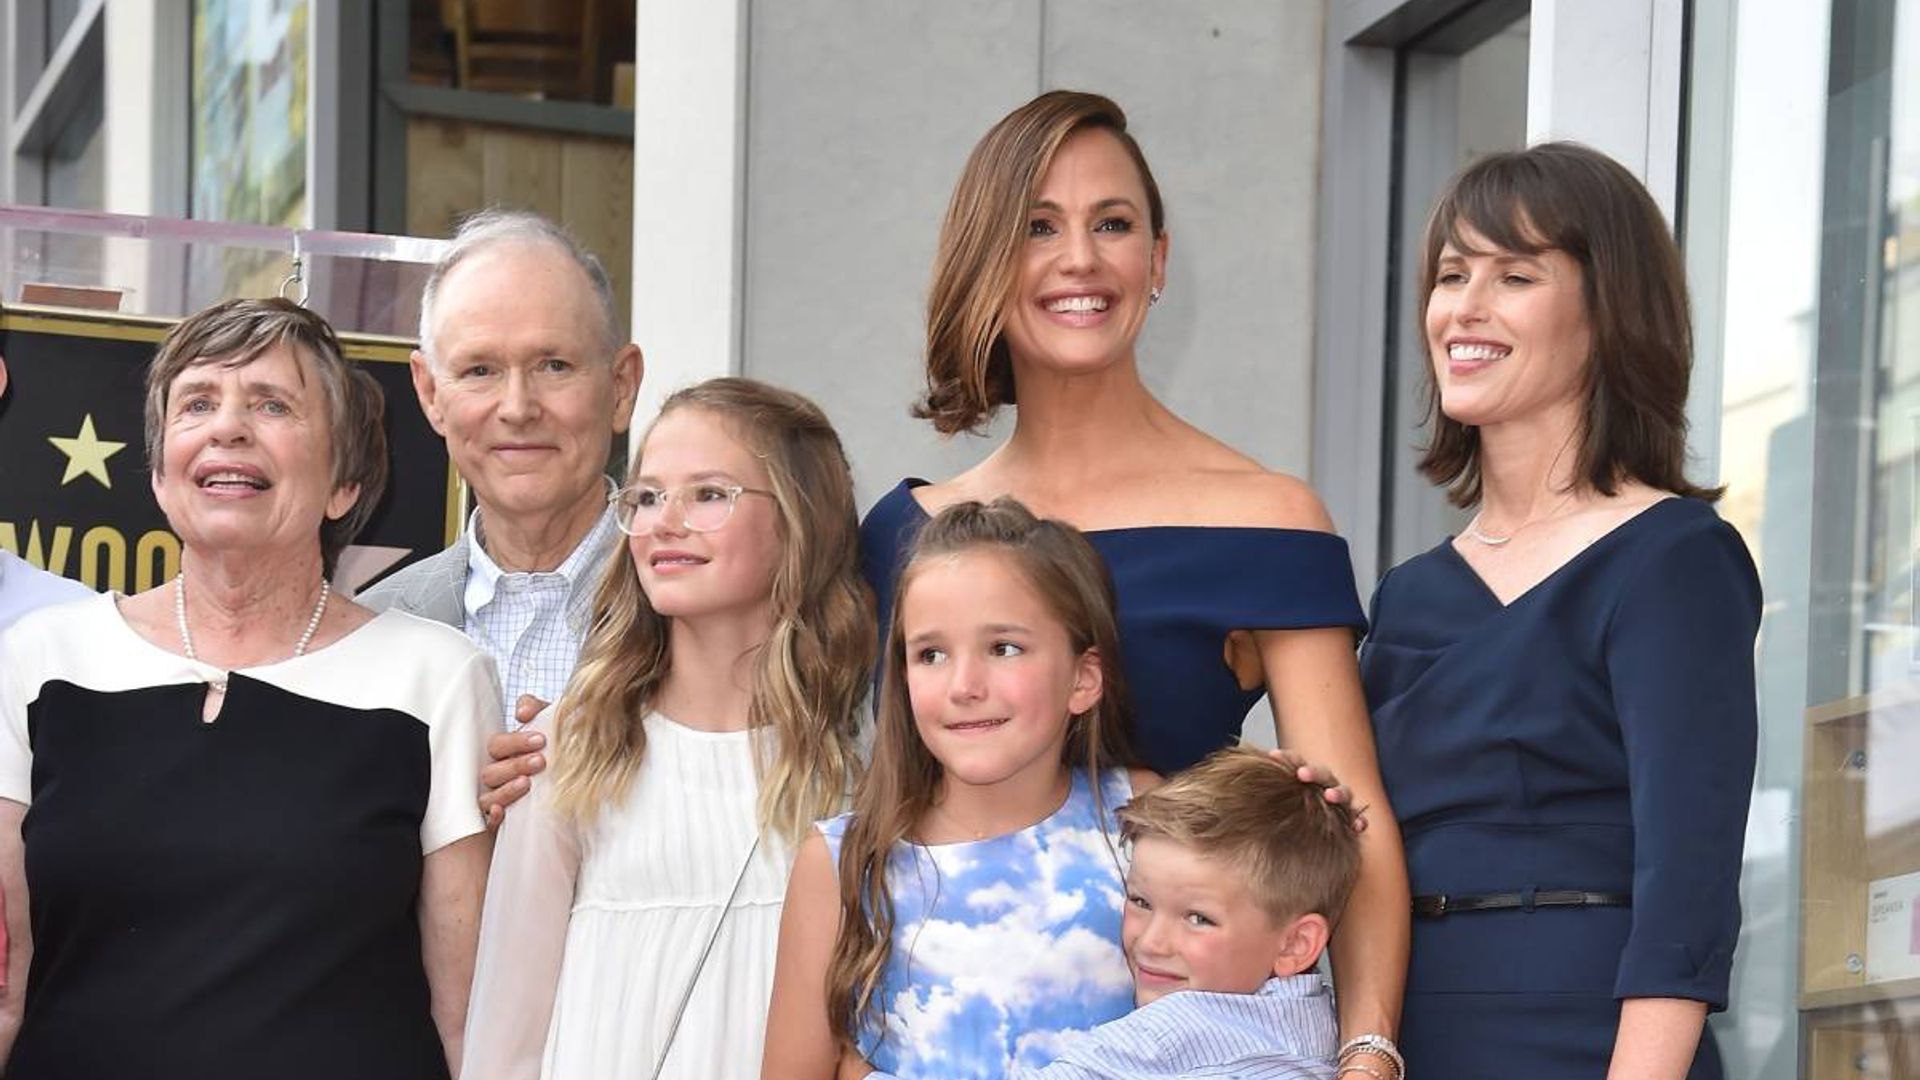 Jennifer Garner shares rare family photos as she marks special occasion during lockdown